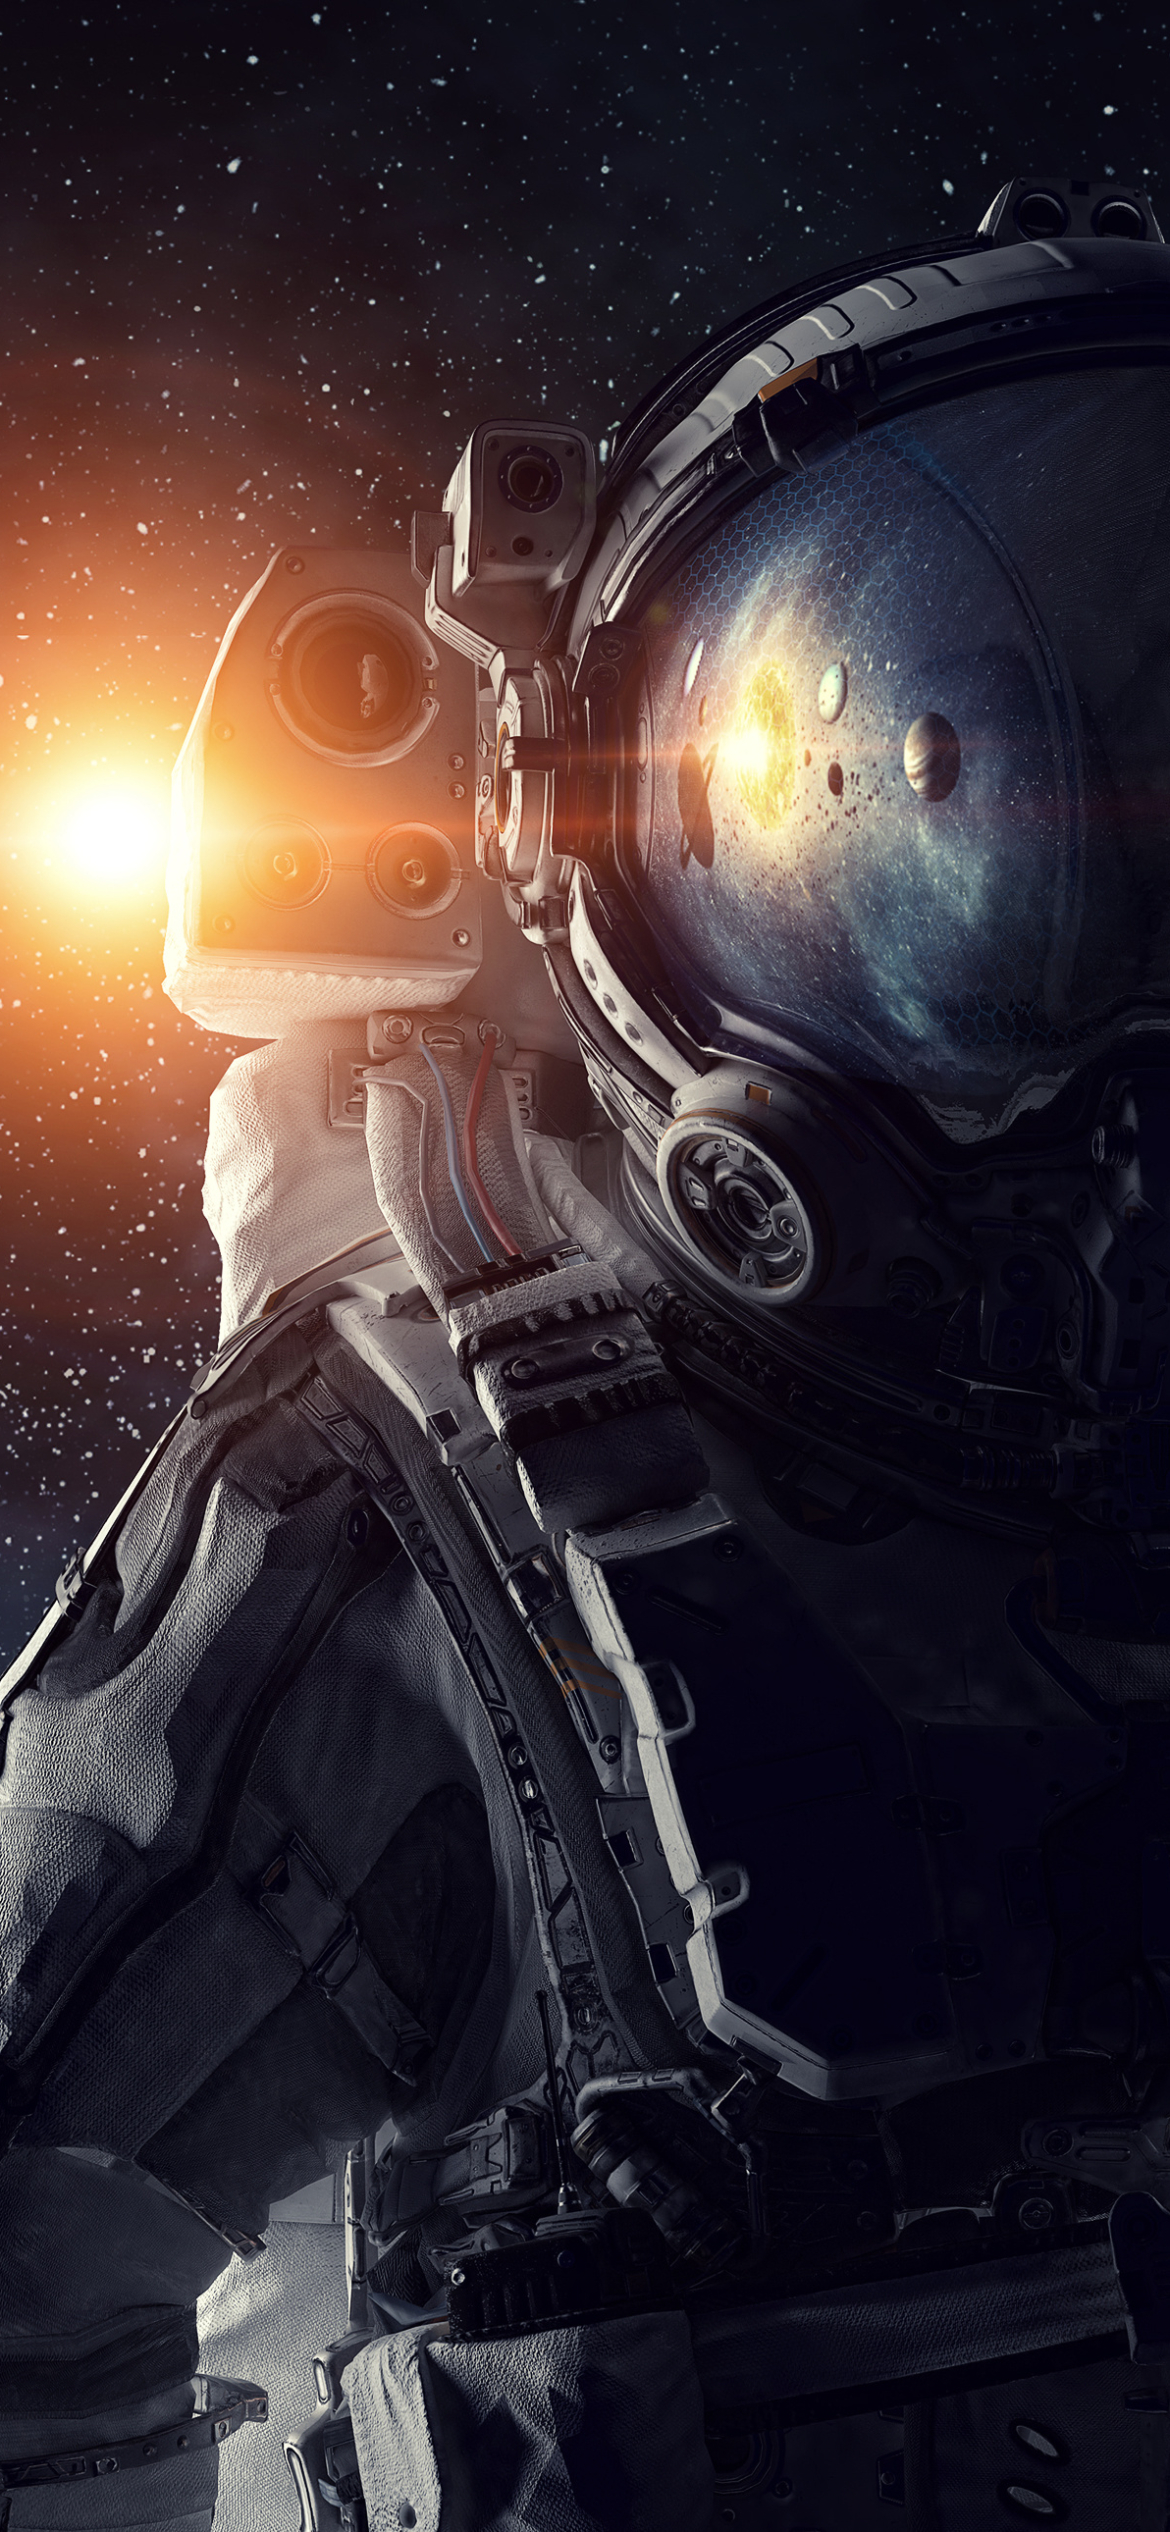 Sci Fi Astronaut Phone Wallpaper - Mobile Abyss